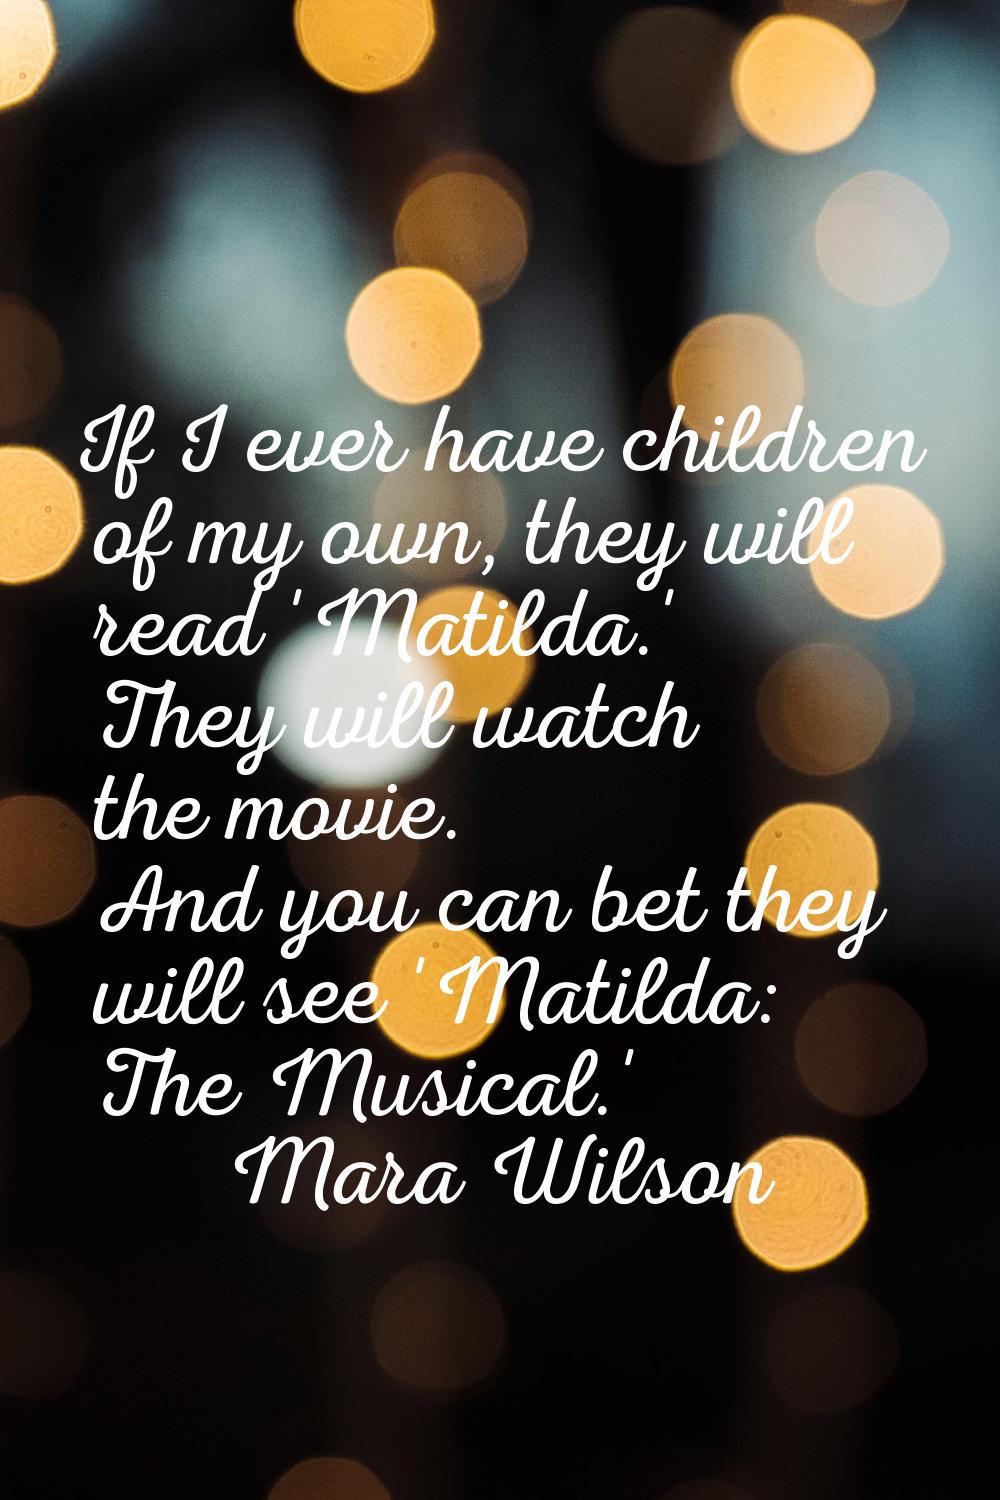 If I ever have children of my own, they will read 'Matilda.' They will watch the movie. And you can